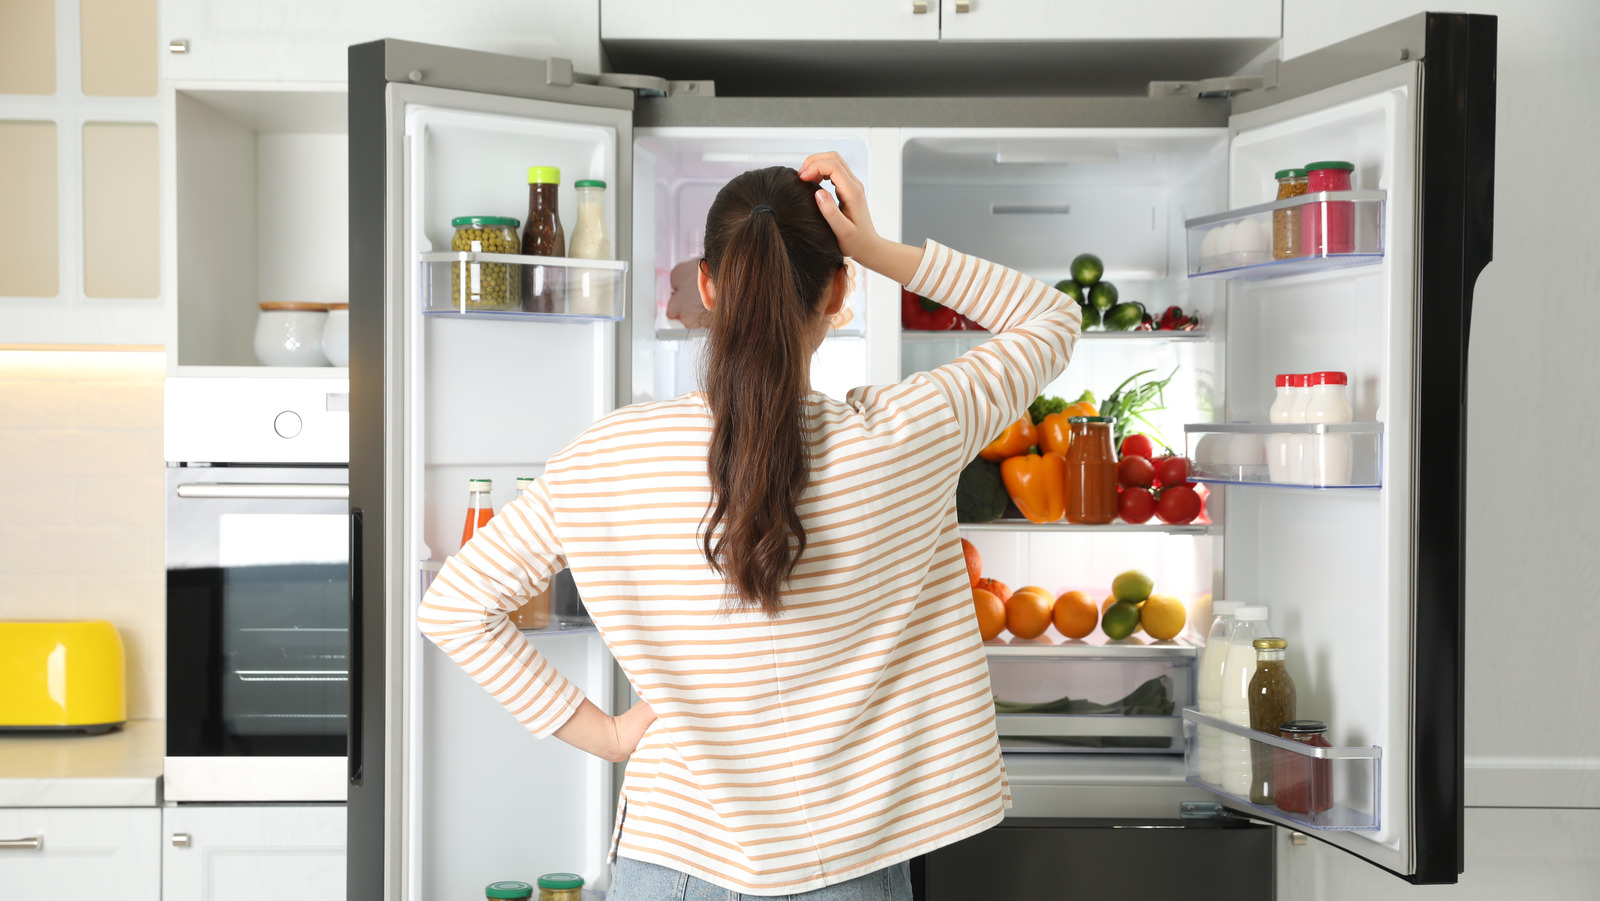 https://www.thedailymeal.com/img/gallery/the-fridge-organization-hack-to-prevent-excess-food-waste/l-intro-1700243325.jpg